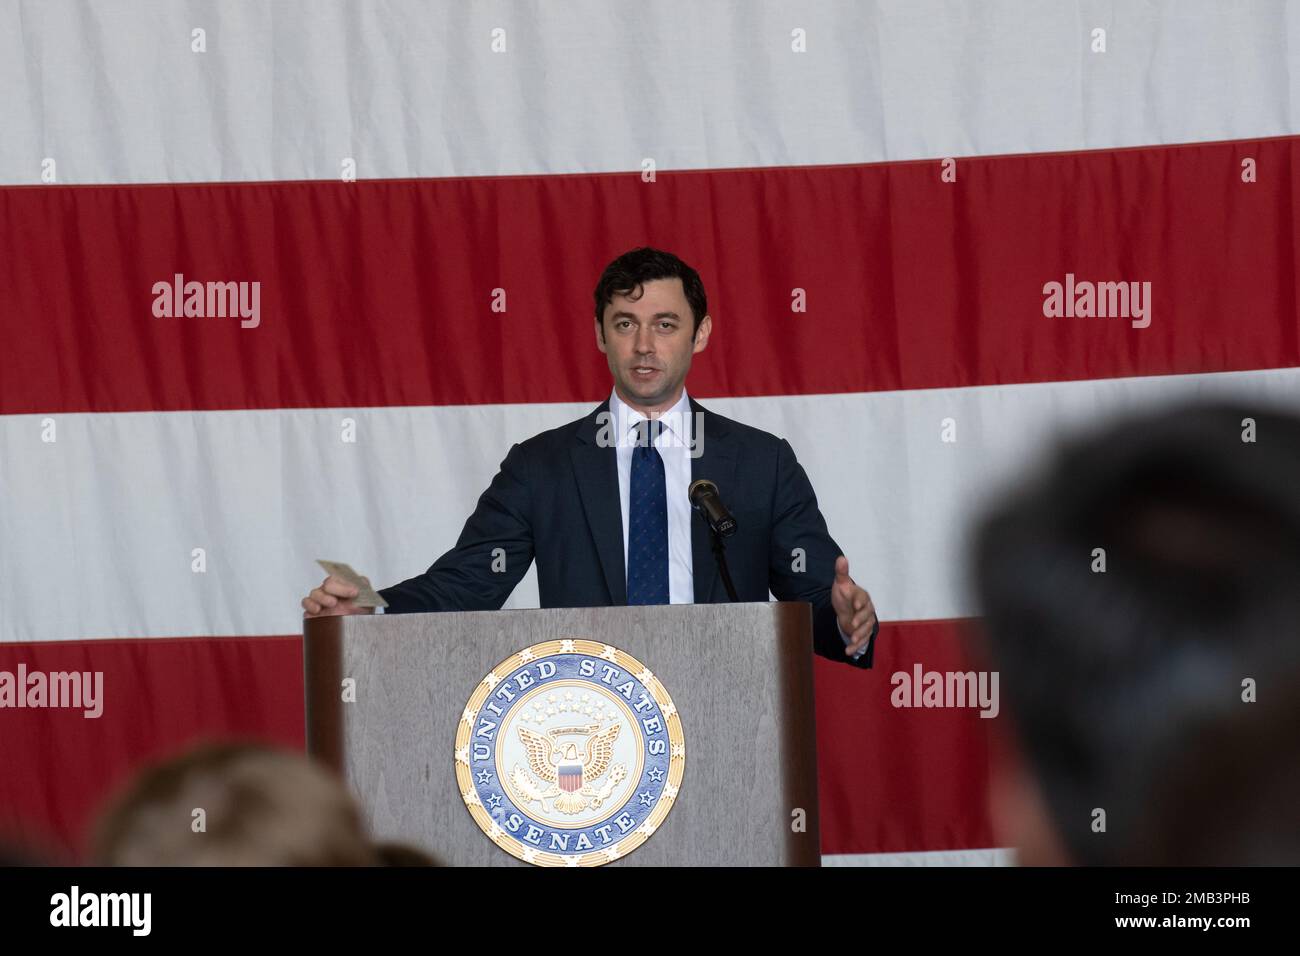 Sen. Jon Ossoff speaks during Academy Day at Dobbins Air Reserve Base, Ga, June 11. 2022. Sen. Jon Ossoff and Rep. Hank Johnson  hosted the 2022 Academy Day at Dobbins. High school students met with congressional staffers to learn their service academy nomination process and spoke with representatives from West Point, Naval Academy, Air Force Academy, Coast Guard Academy, Merchant Marine Academy, and other military accessioning sources throughout the morning. Stock Photo